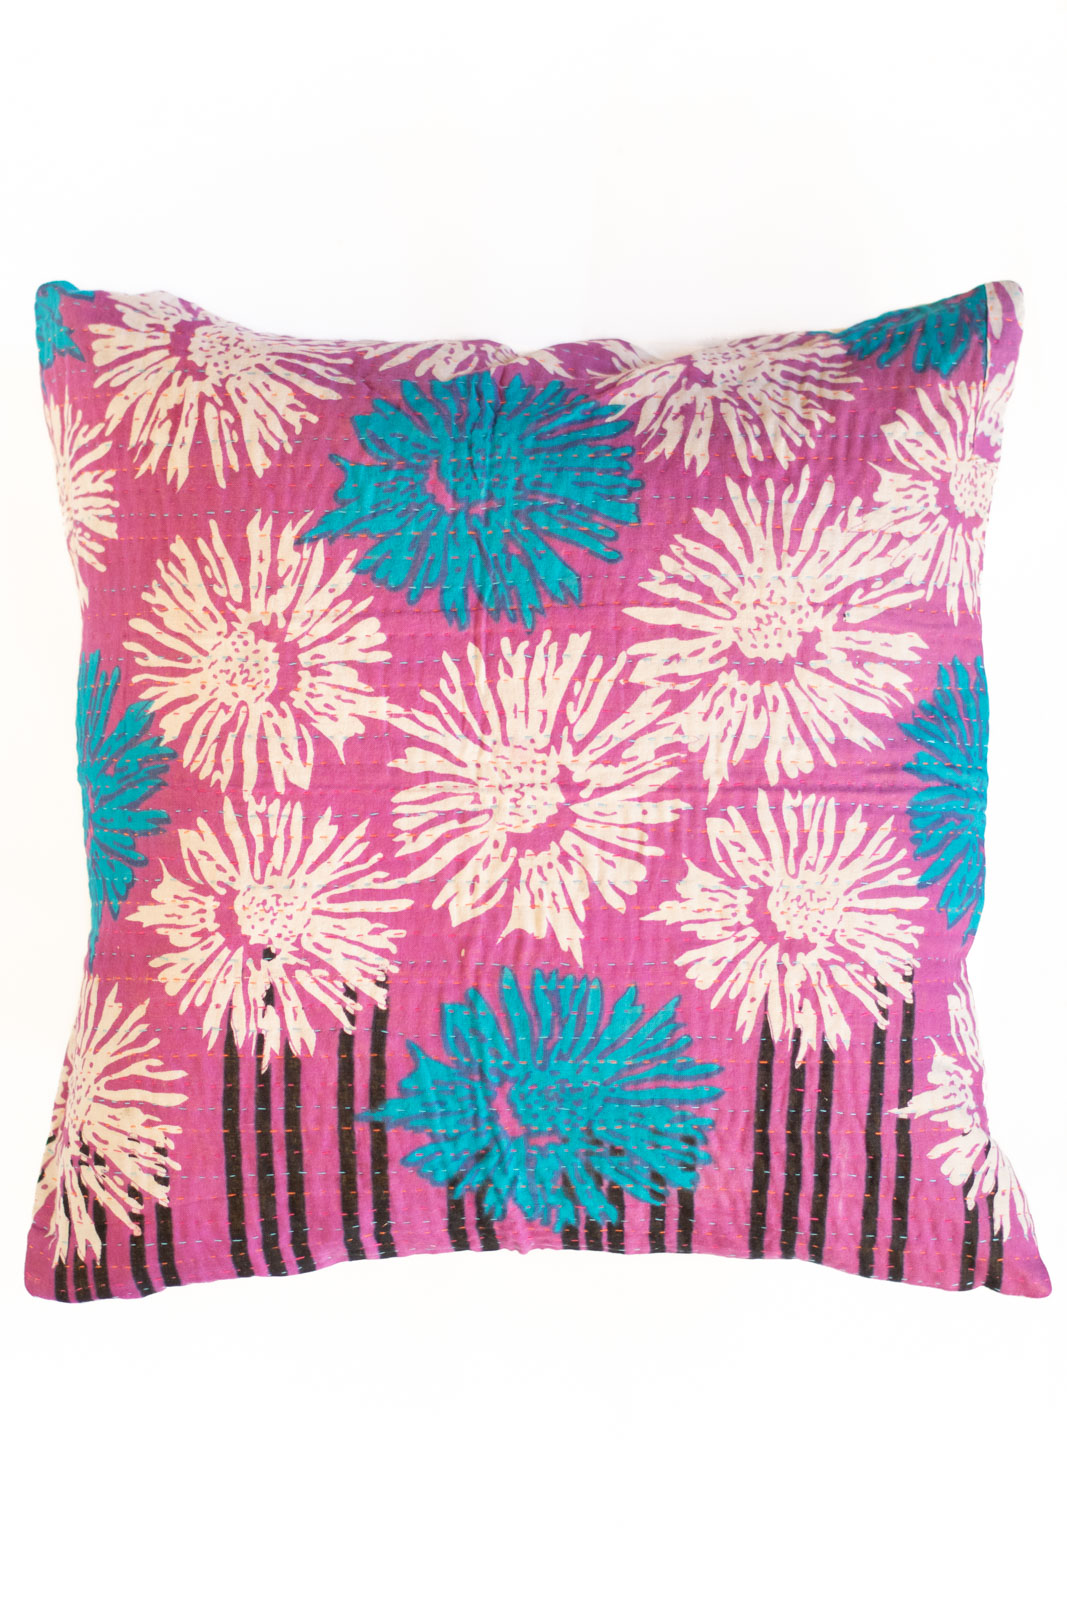 Dignity no. 1 Kantha Pillow Cover